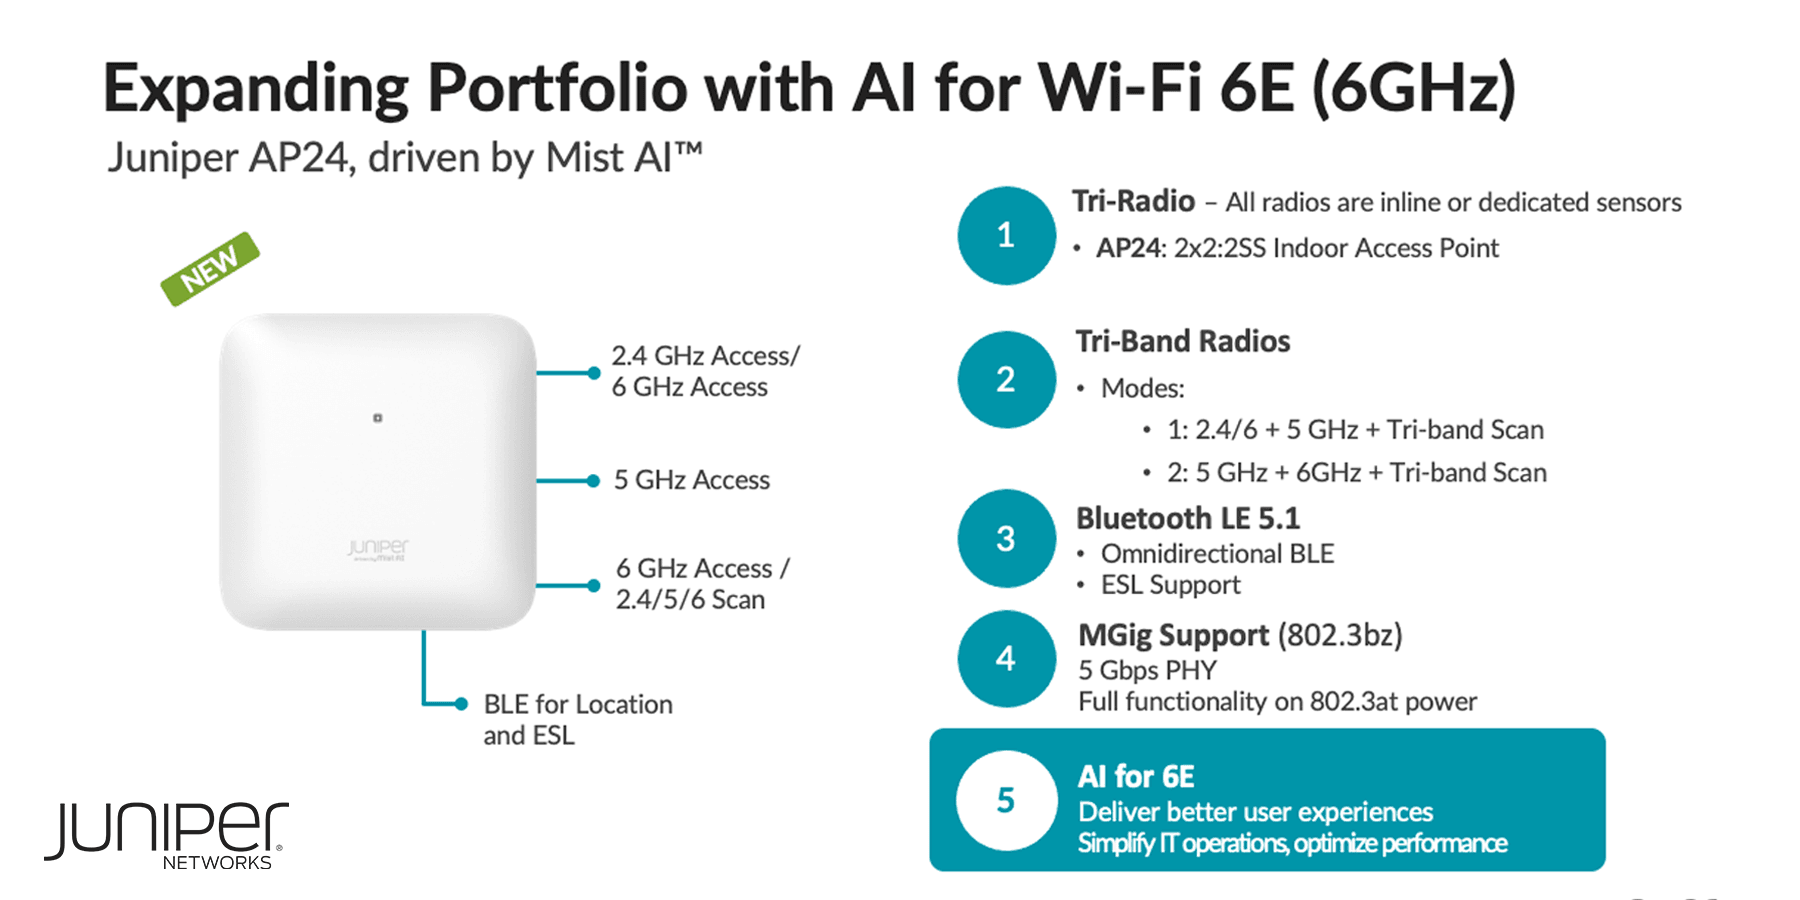 Where Goes Apple, So Goes the Industry – What Wi-Fi 6E Means for the Future of Wireless